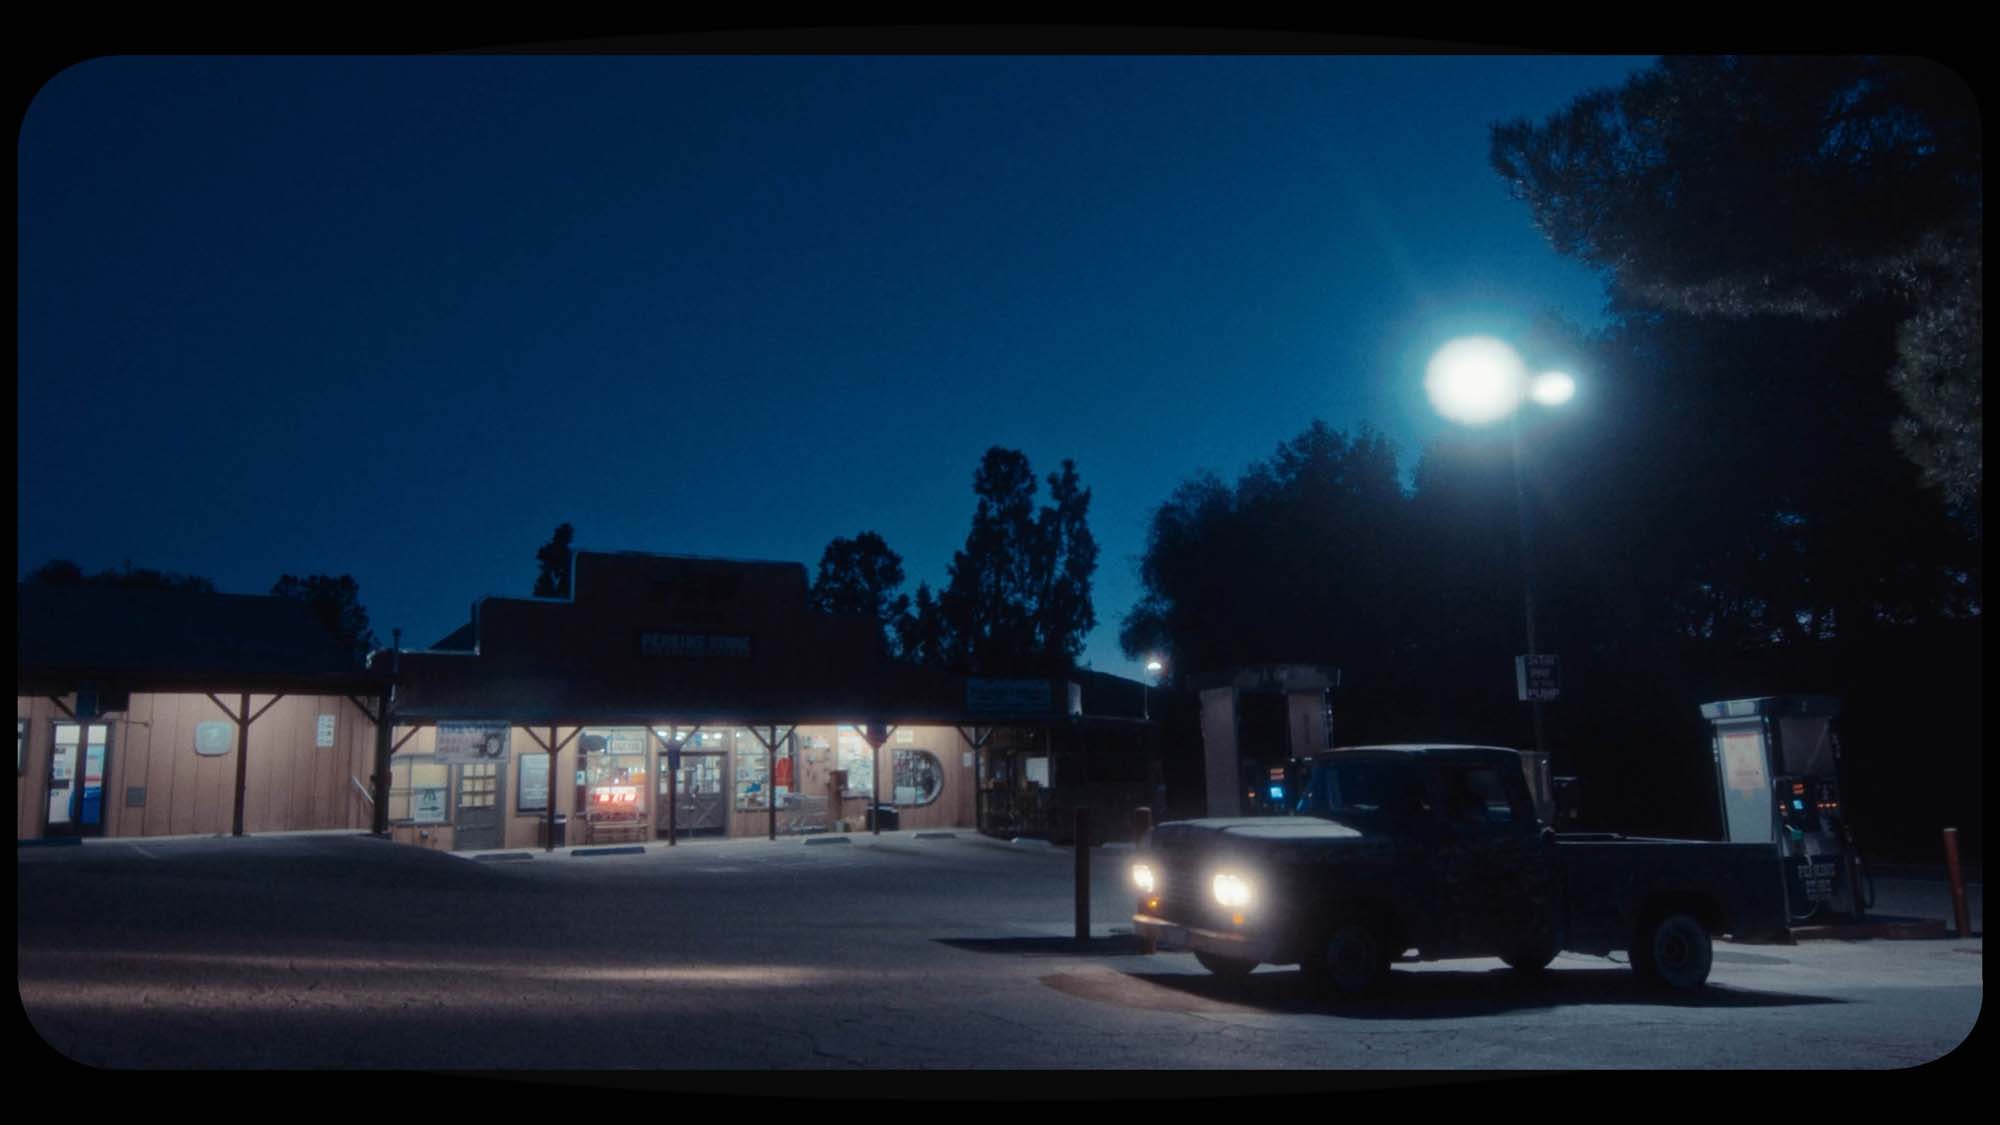 frames from music video, vintage look, added halation and vintage effects, gas station scene